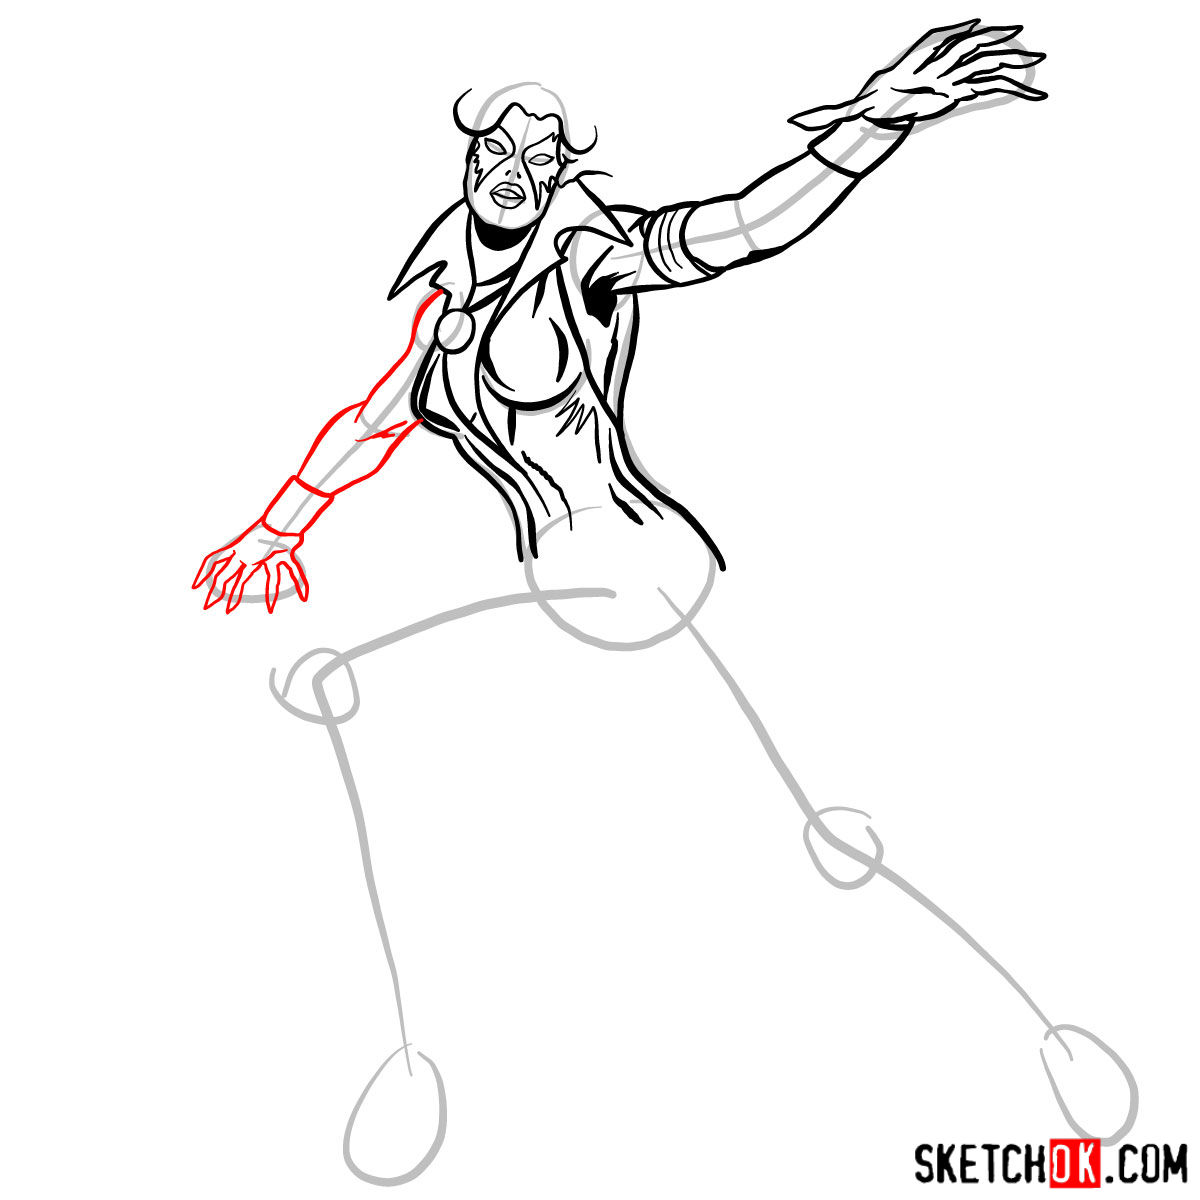 How to draw Dazzler the mutant from X-Men series - step 08